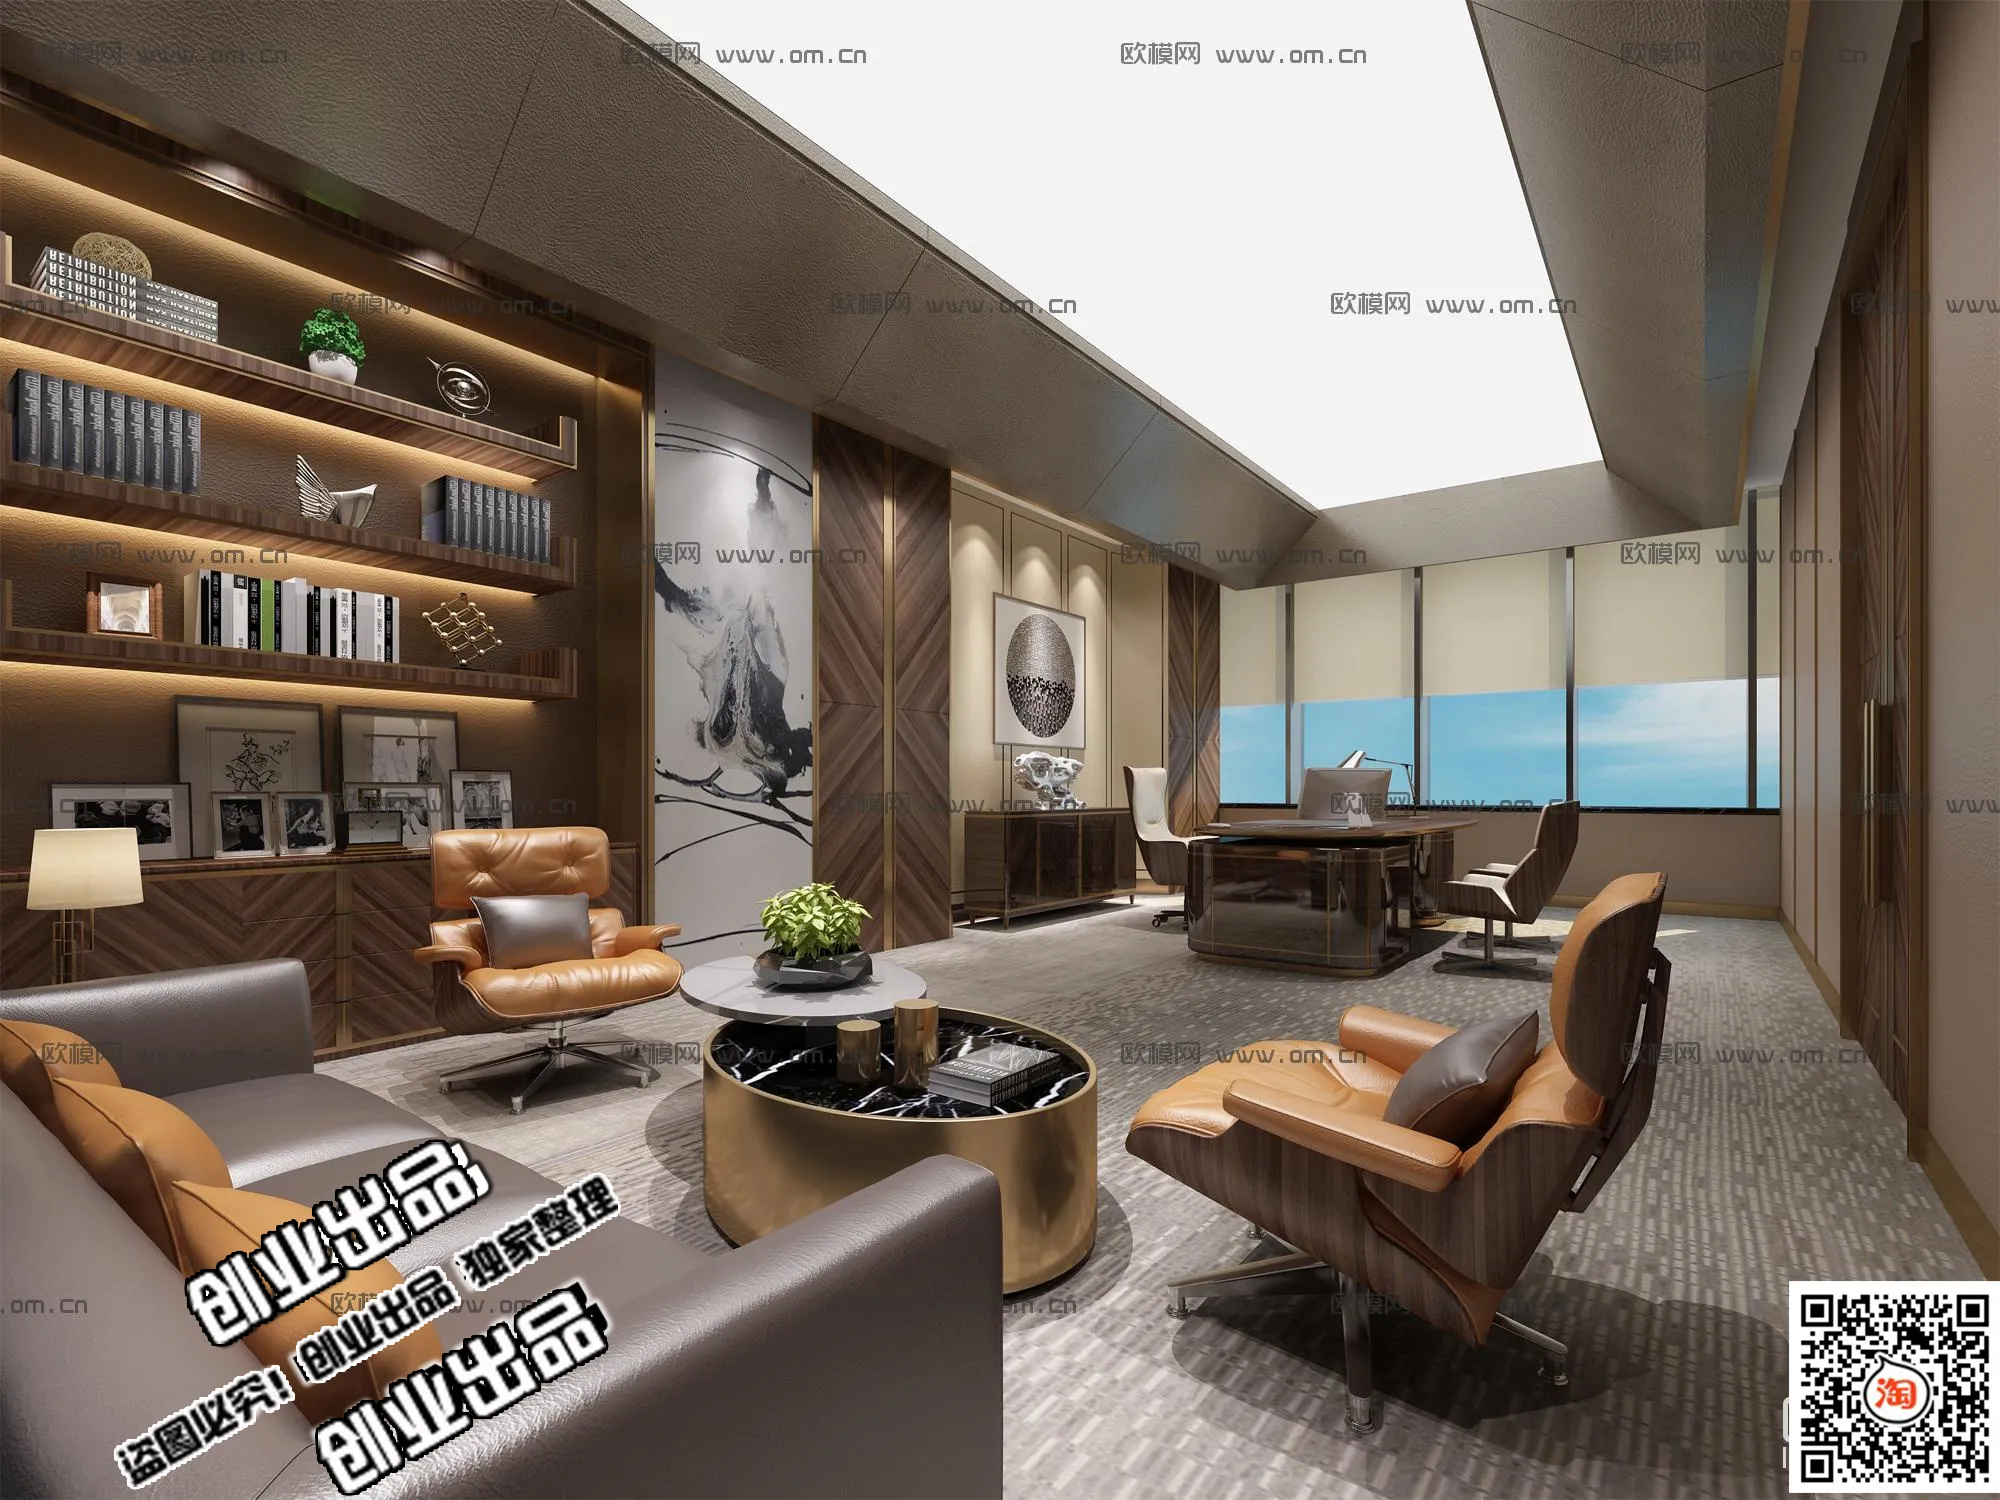 3D OFFICE INTERIOR (VRAY) – MANAGER ROOM 3D SCENES – 059